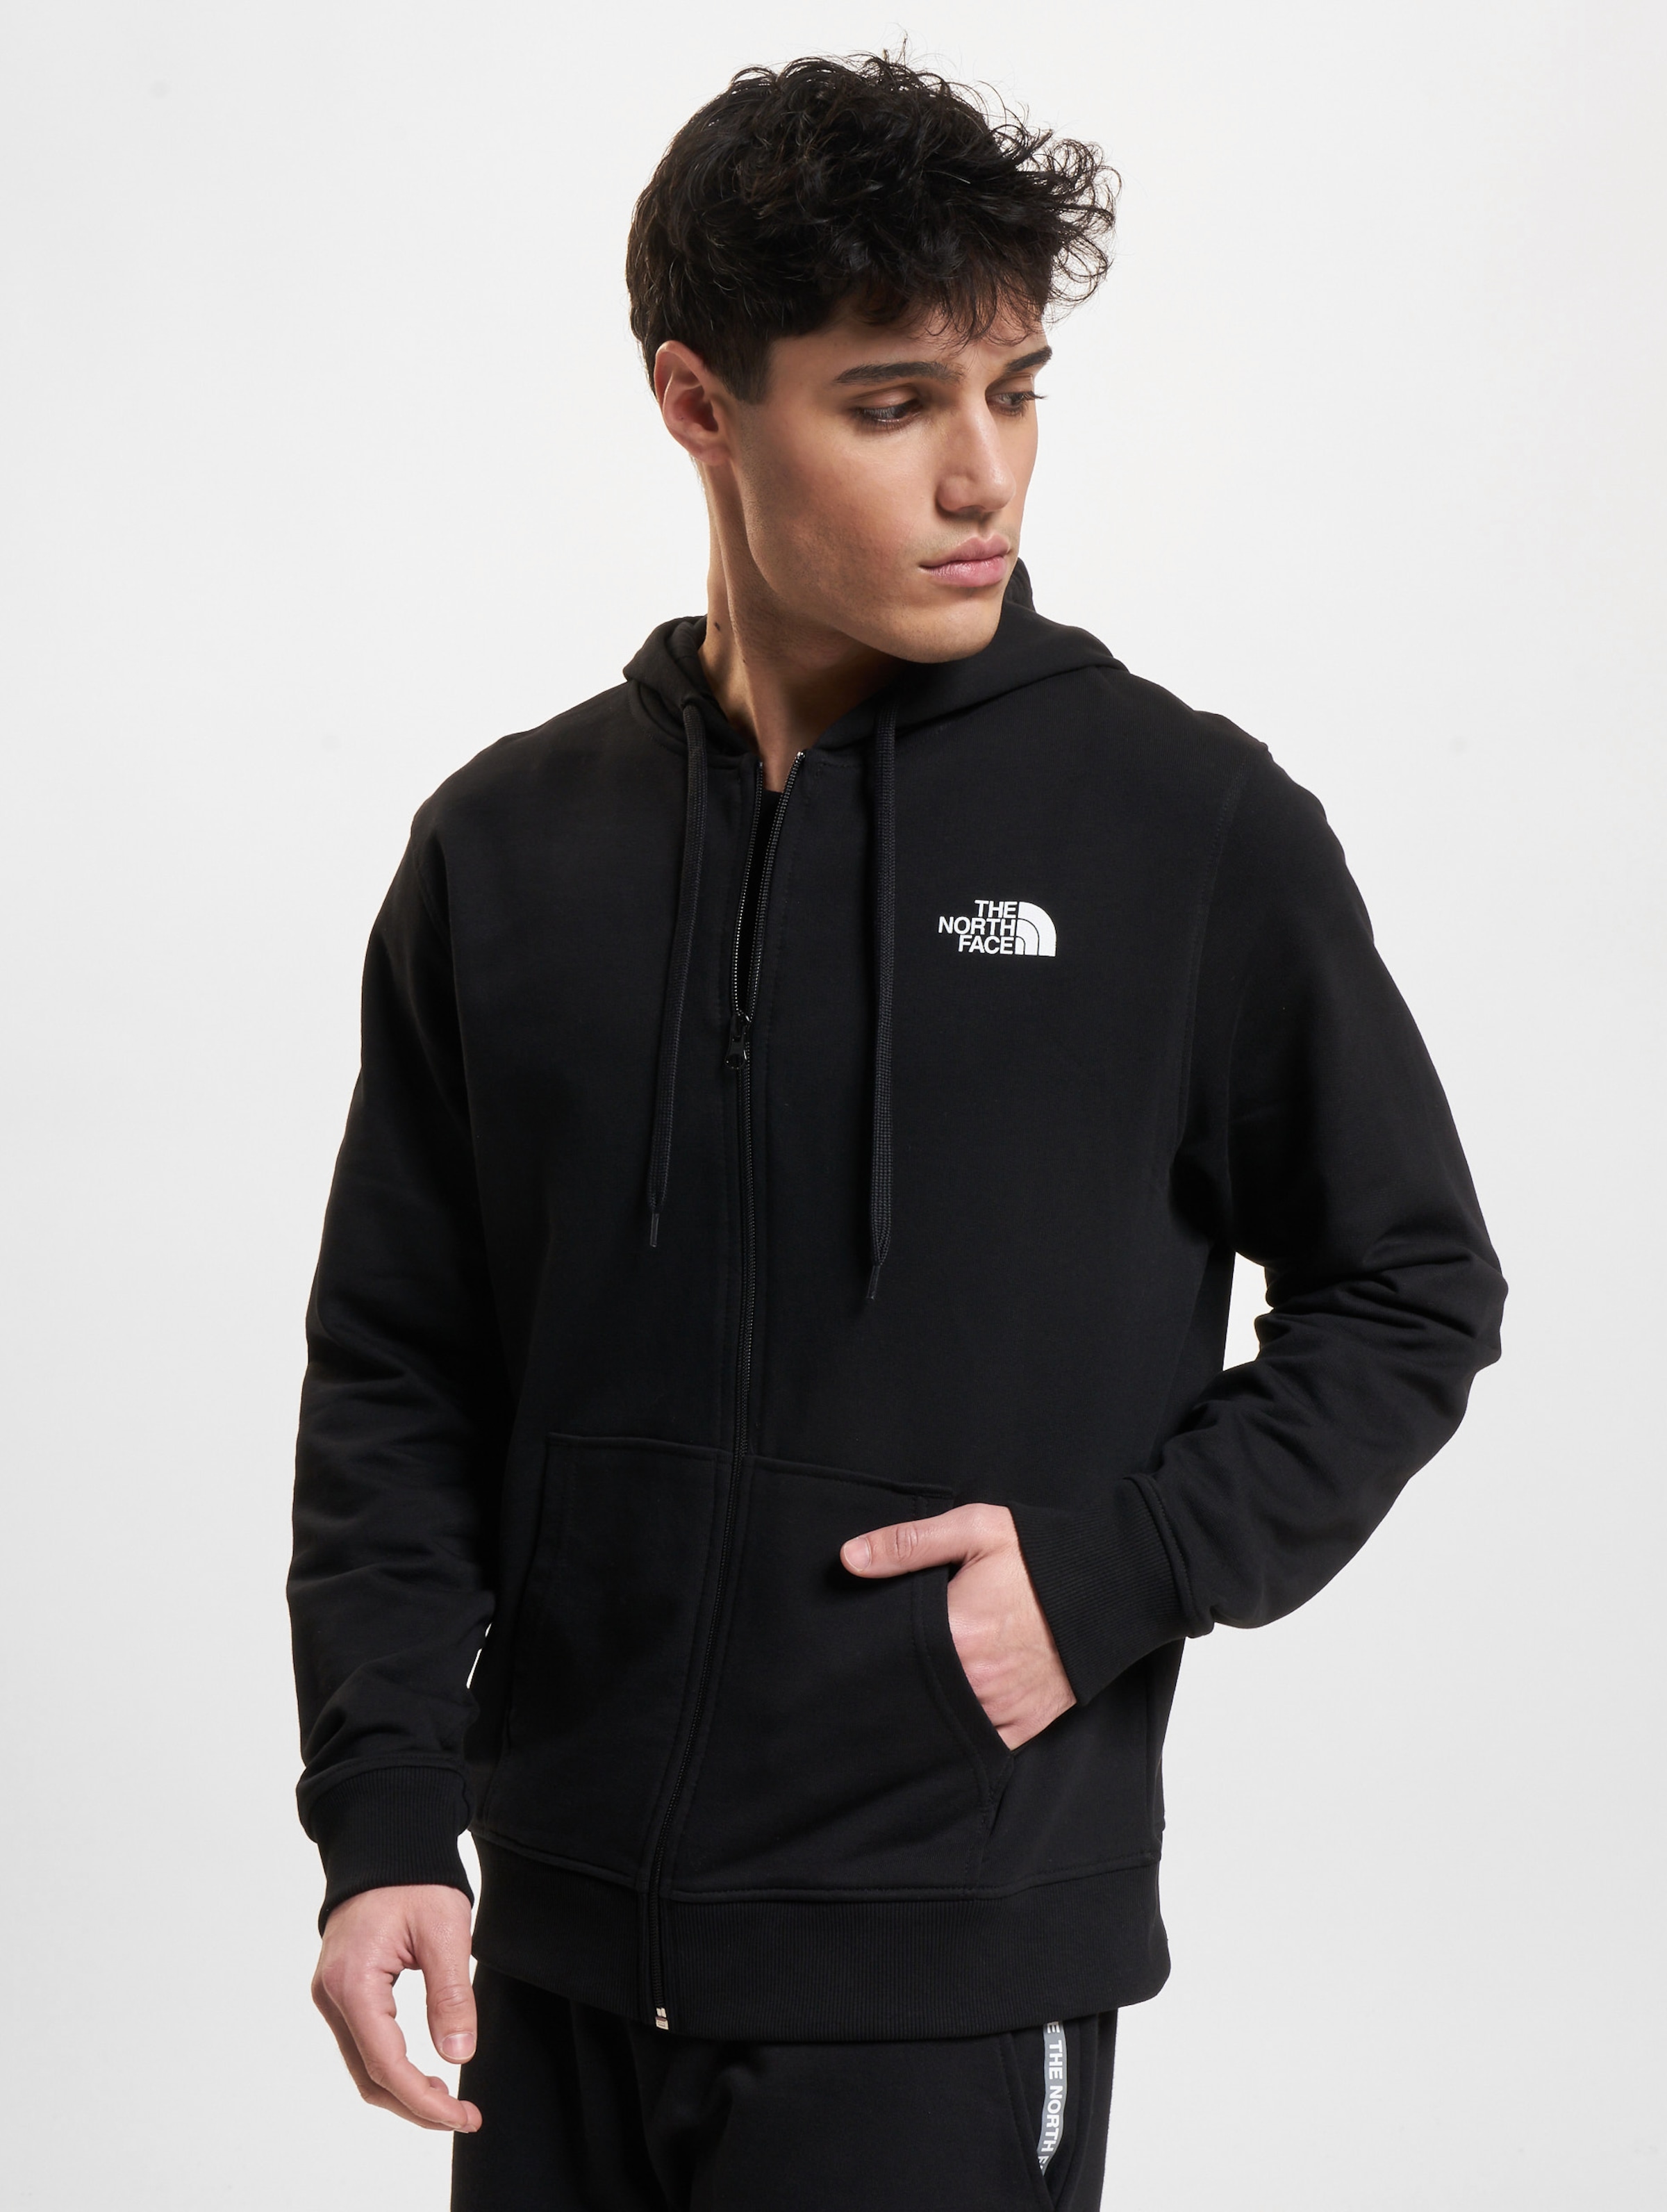 The North Face Fashion, buy online cheaply in the The North Face 